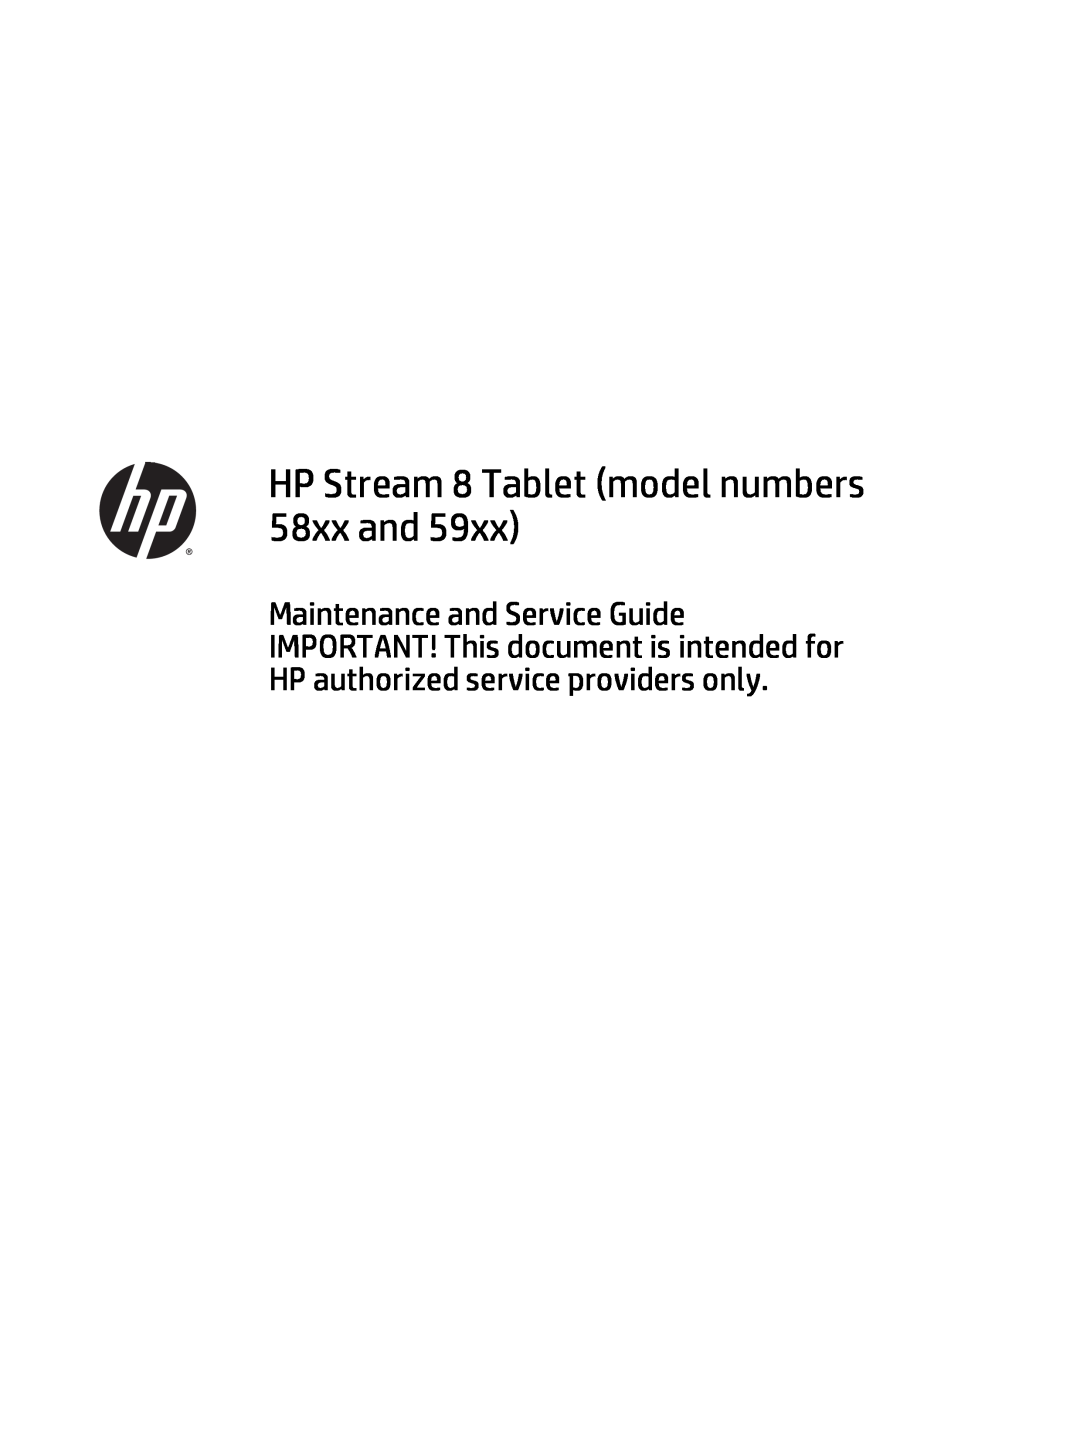 HP Stream 8 - 5801, Stream 8 - 5909 manual HP Stream 8 Tablet model numbers 58xx and 